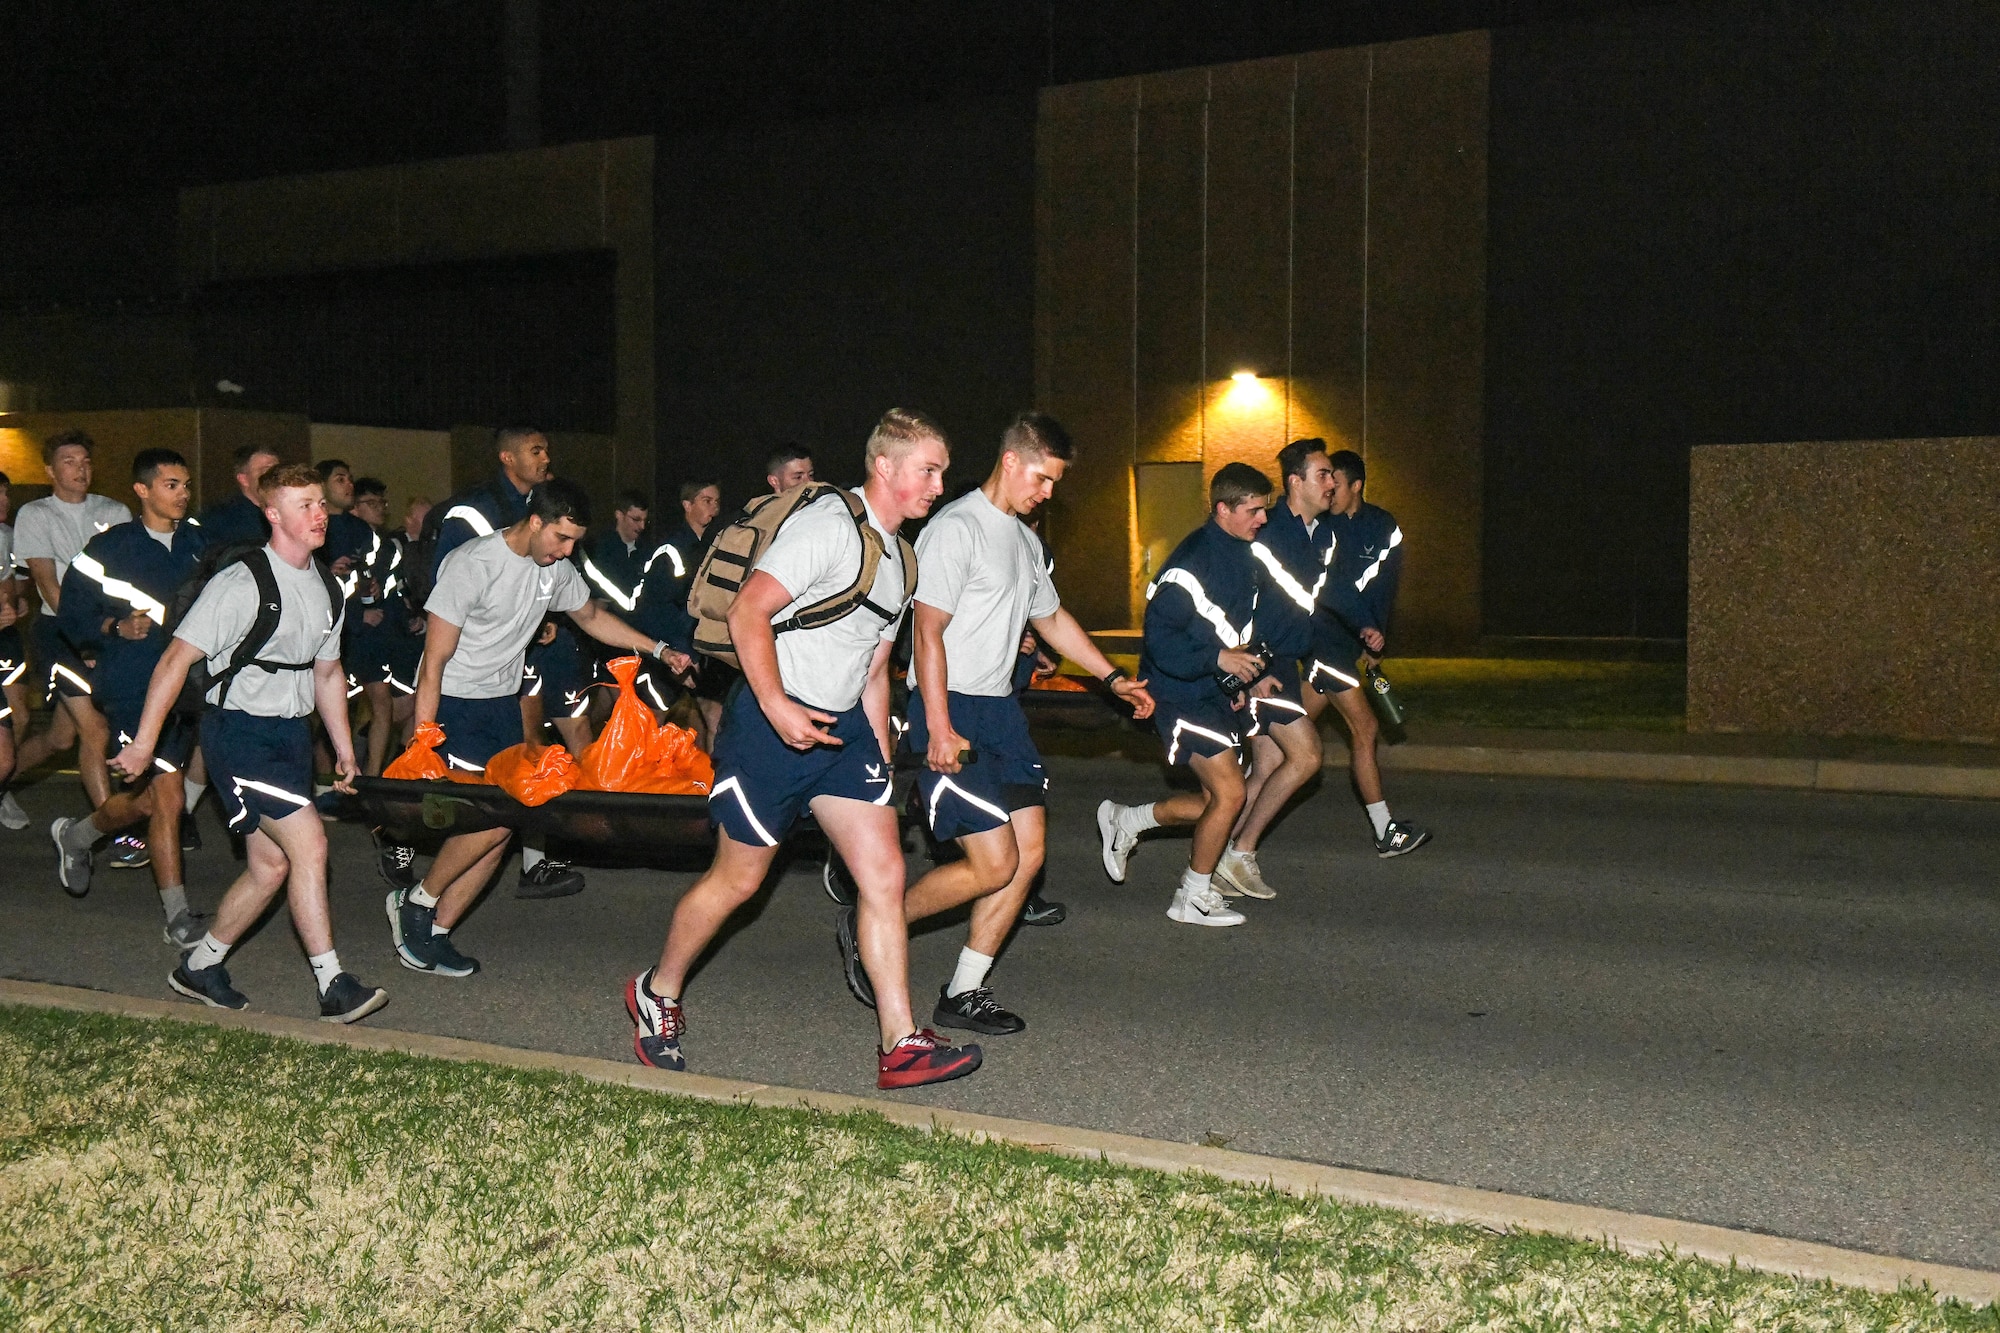 Students from the 97th Training Squadron participate in a 185-pound buddy drag during the Talon Challenge at Altus Air Force Base, Oklahoma, April 10, 2022. Throughout training, students are provided opportunities to grow physically, mentally, socially and spiritually. (U.S. Air Force photo by Senior Airman Trenton Jancze)